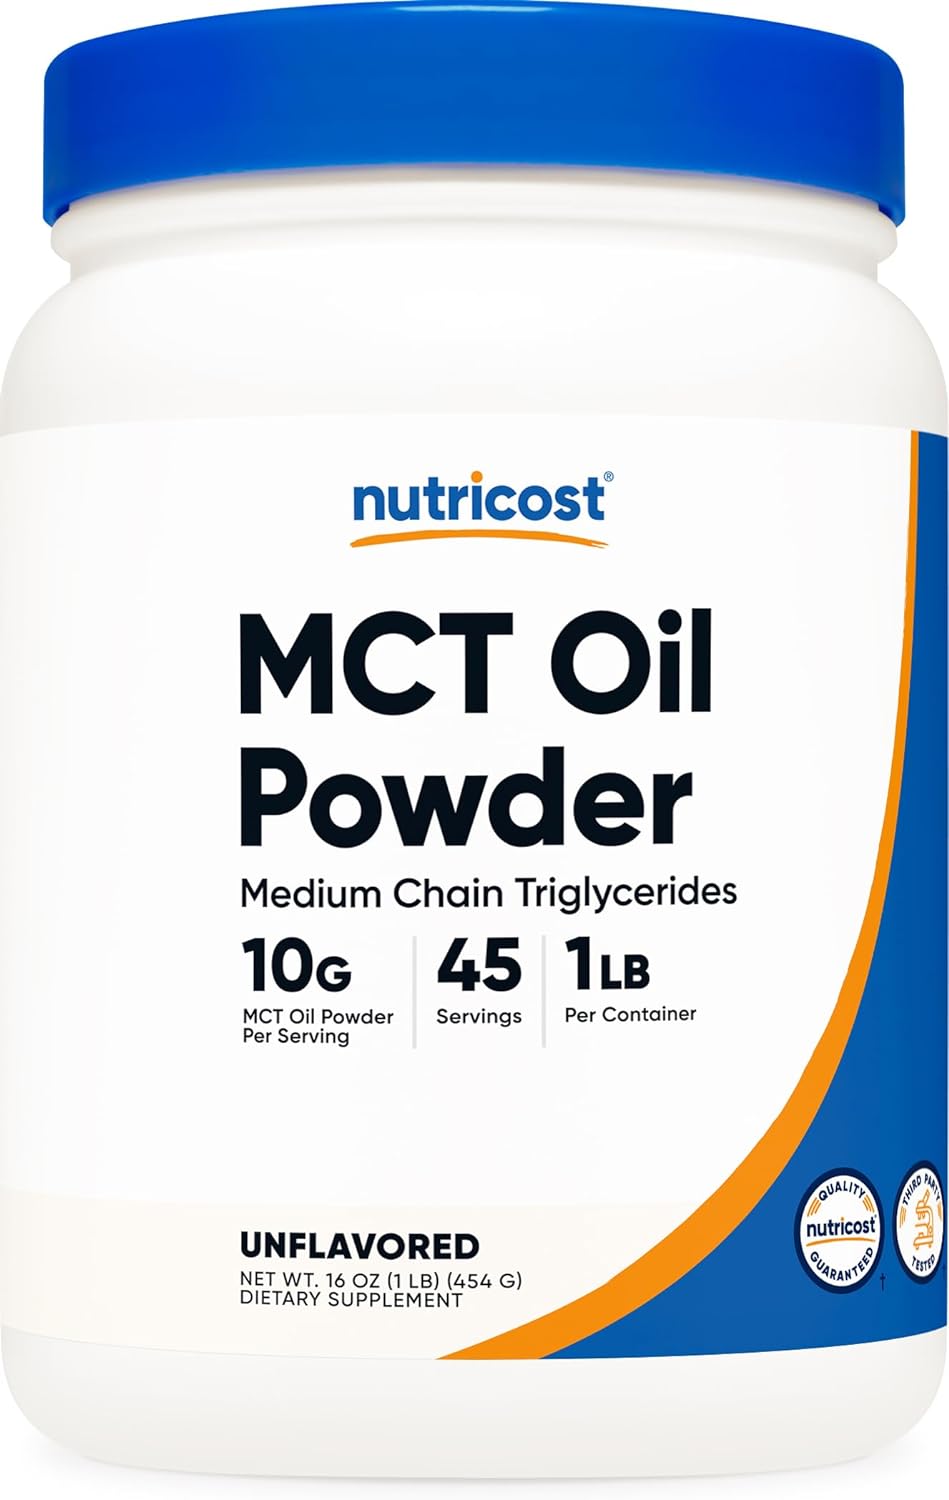 Nutricost MCT Oil Powder 1LB (16oz) - Great for Keto, Ketosis and Keto1.2 Pounds